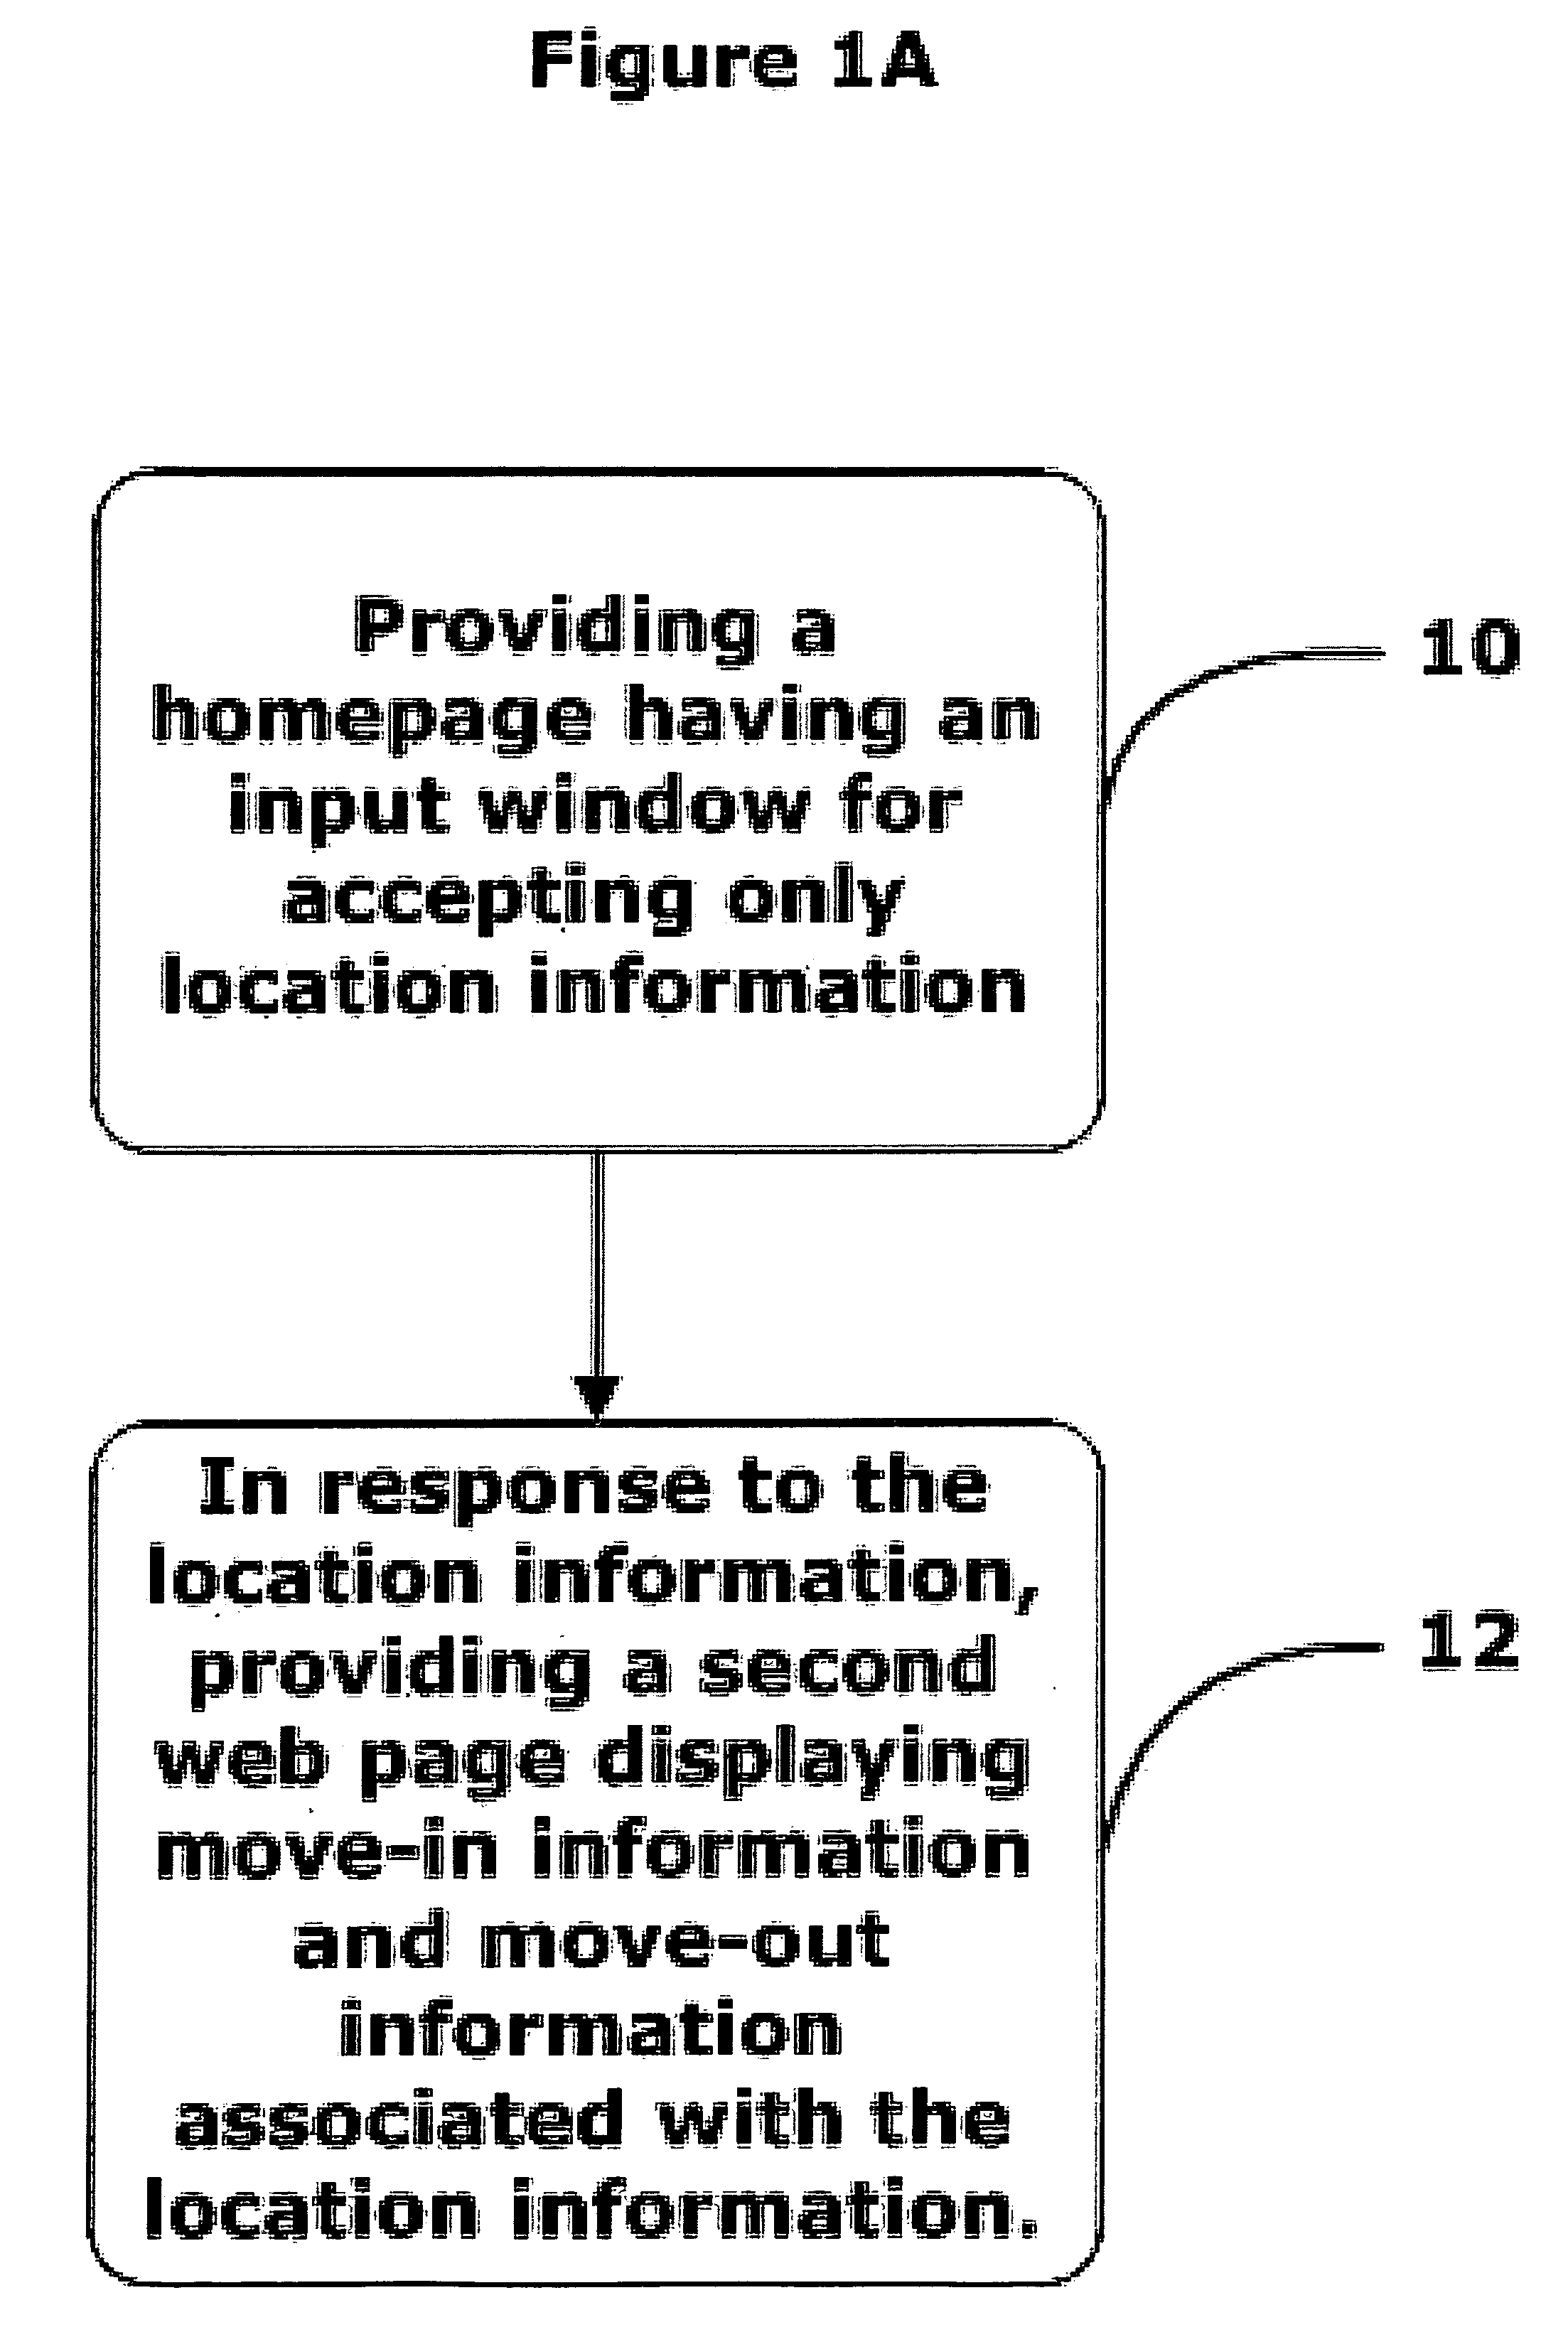 System for simply and directly providing local information based solely on zip code information